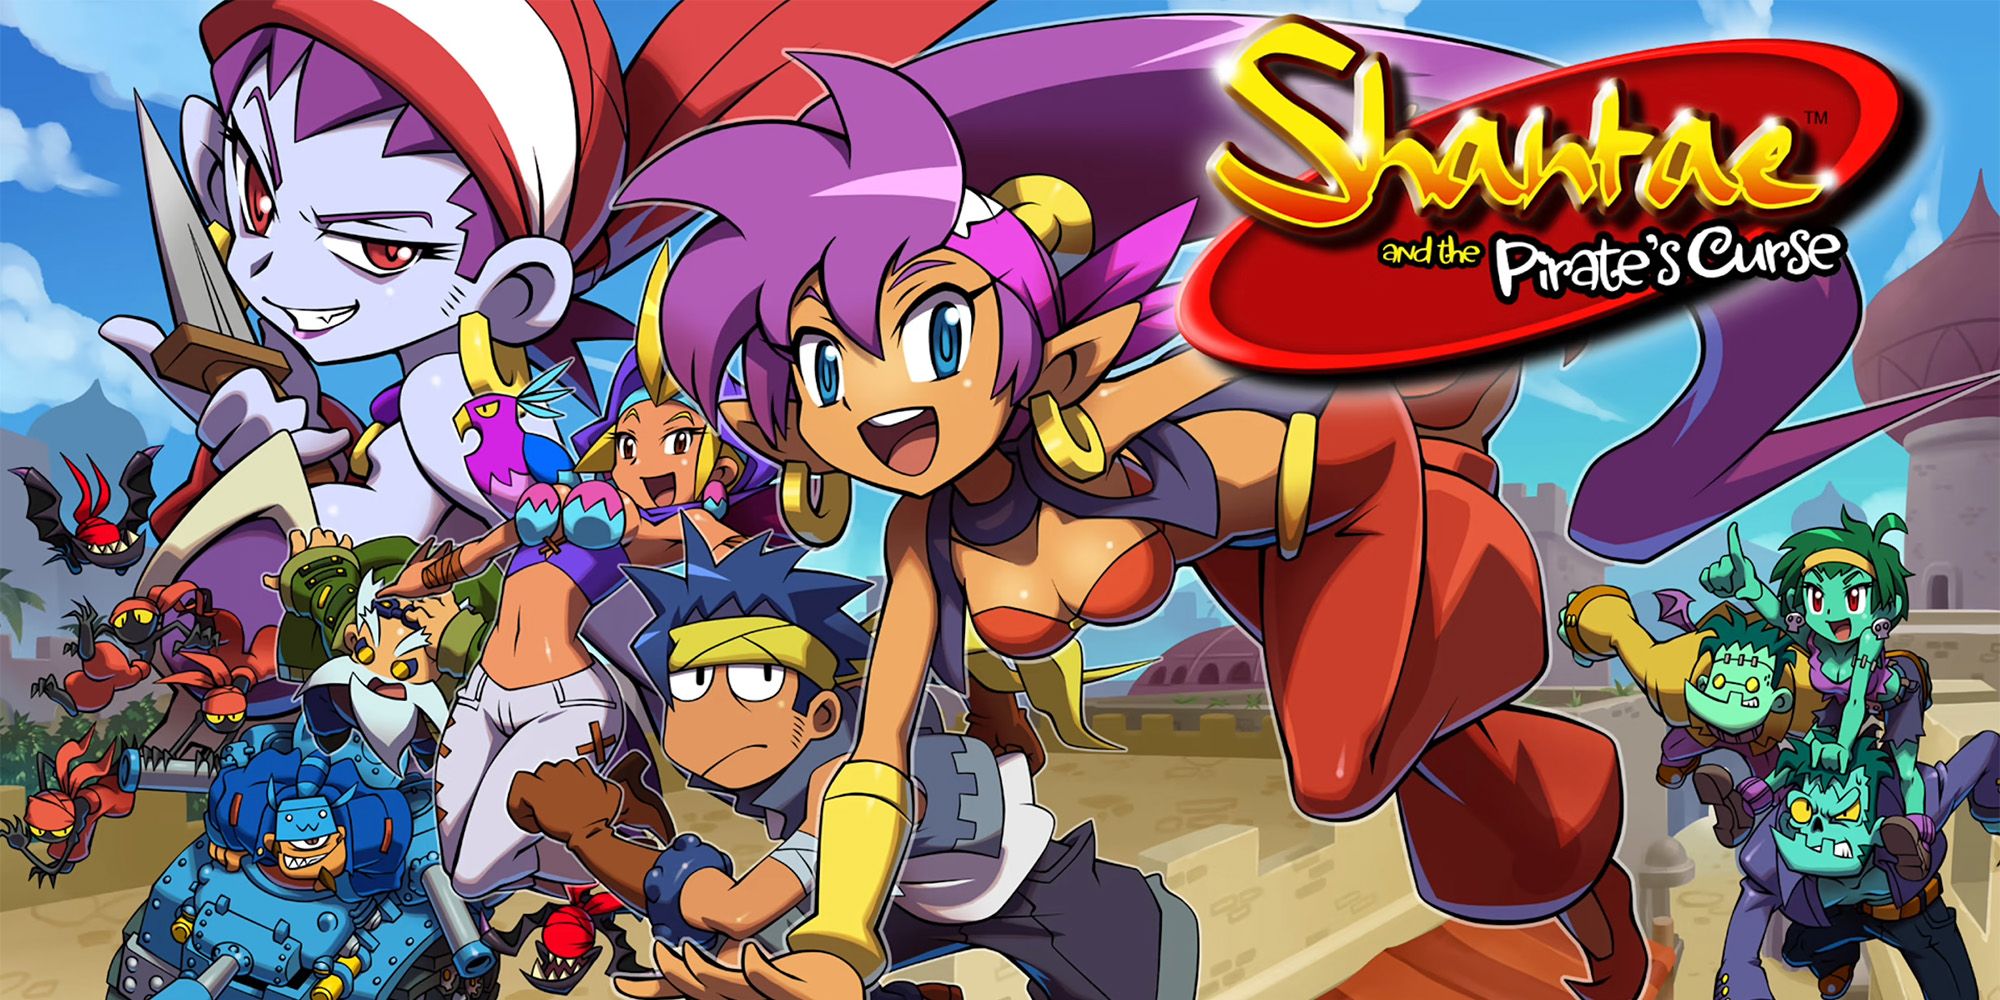 Shantae And The Pirate's Curse Collector's Edition - Shantae, Risky Boots, Sky, Bolo, And The Rest Of The Cast